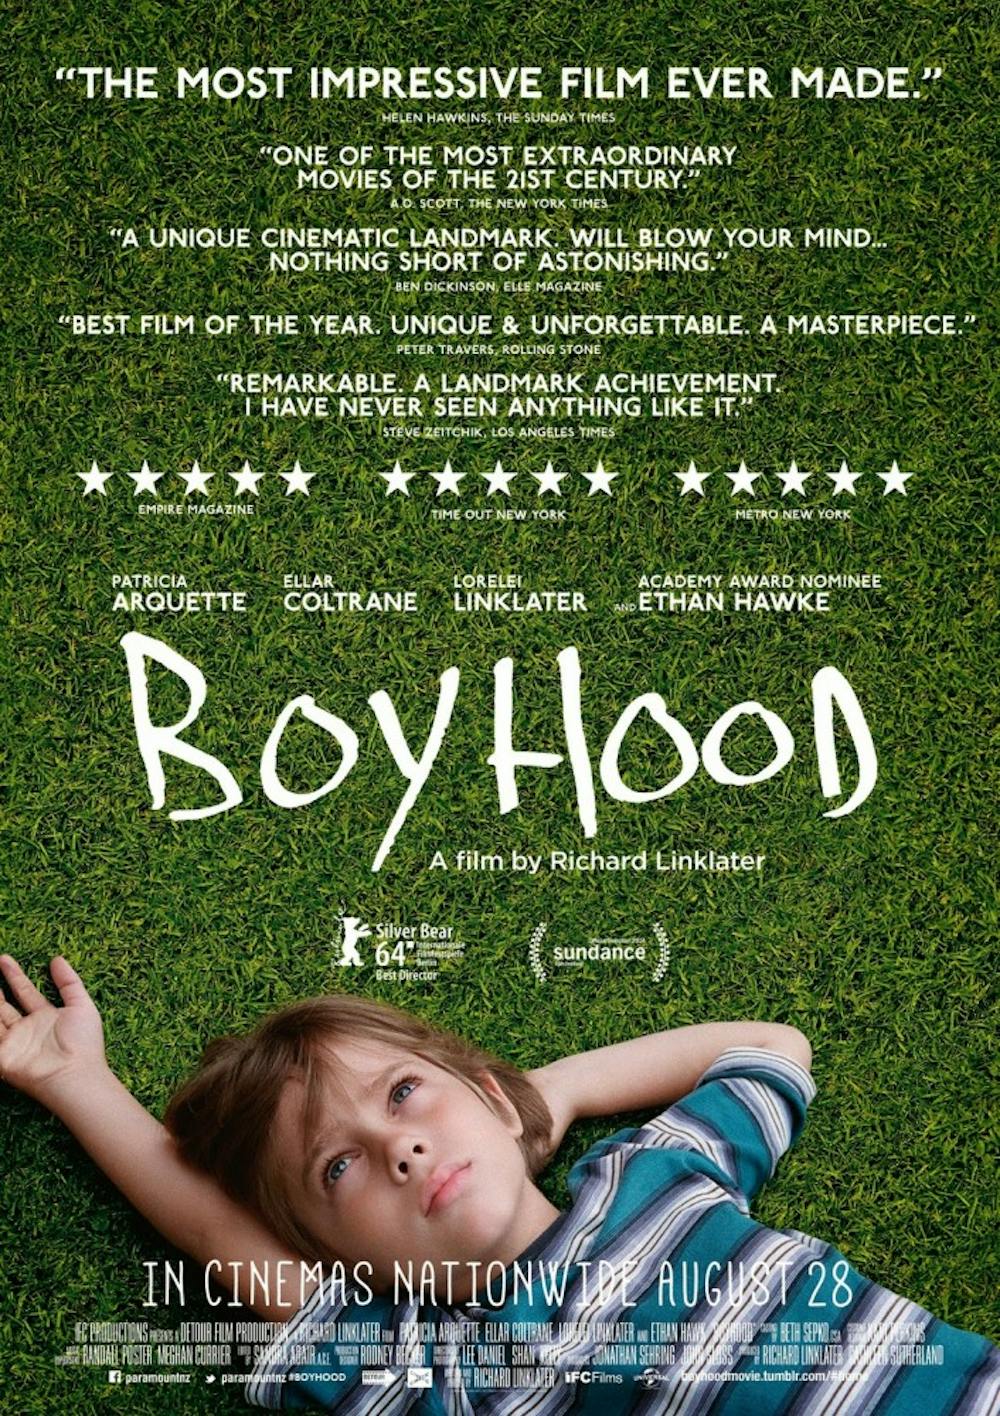 <p>Richard Linklater's summer flick "Boyhood" wowed audiences and critics alike by capturing the recent past.</p>